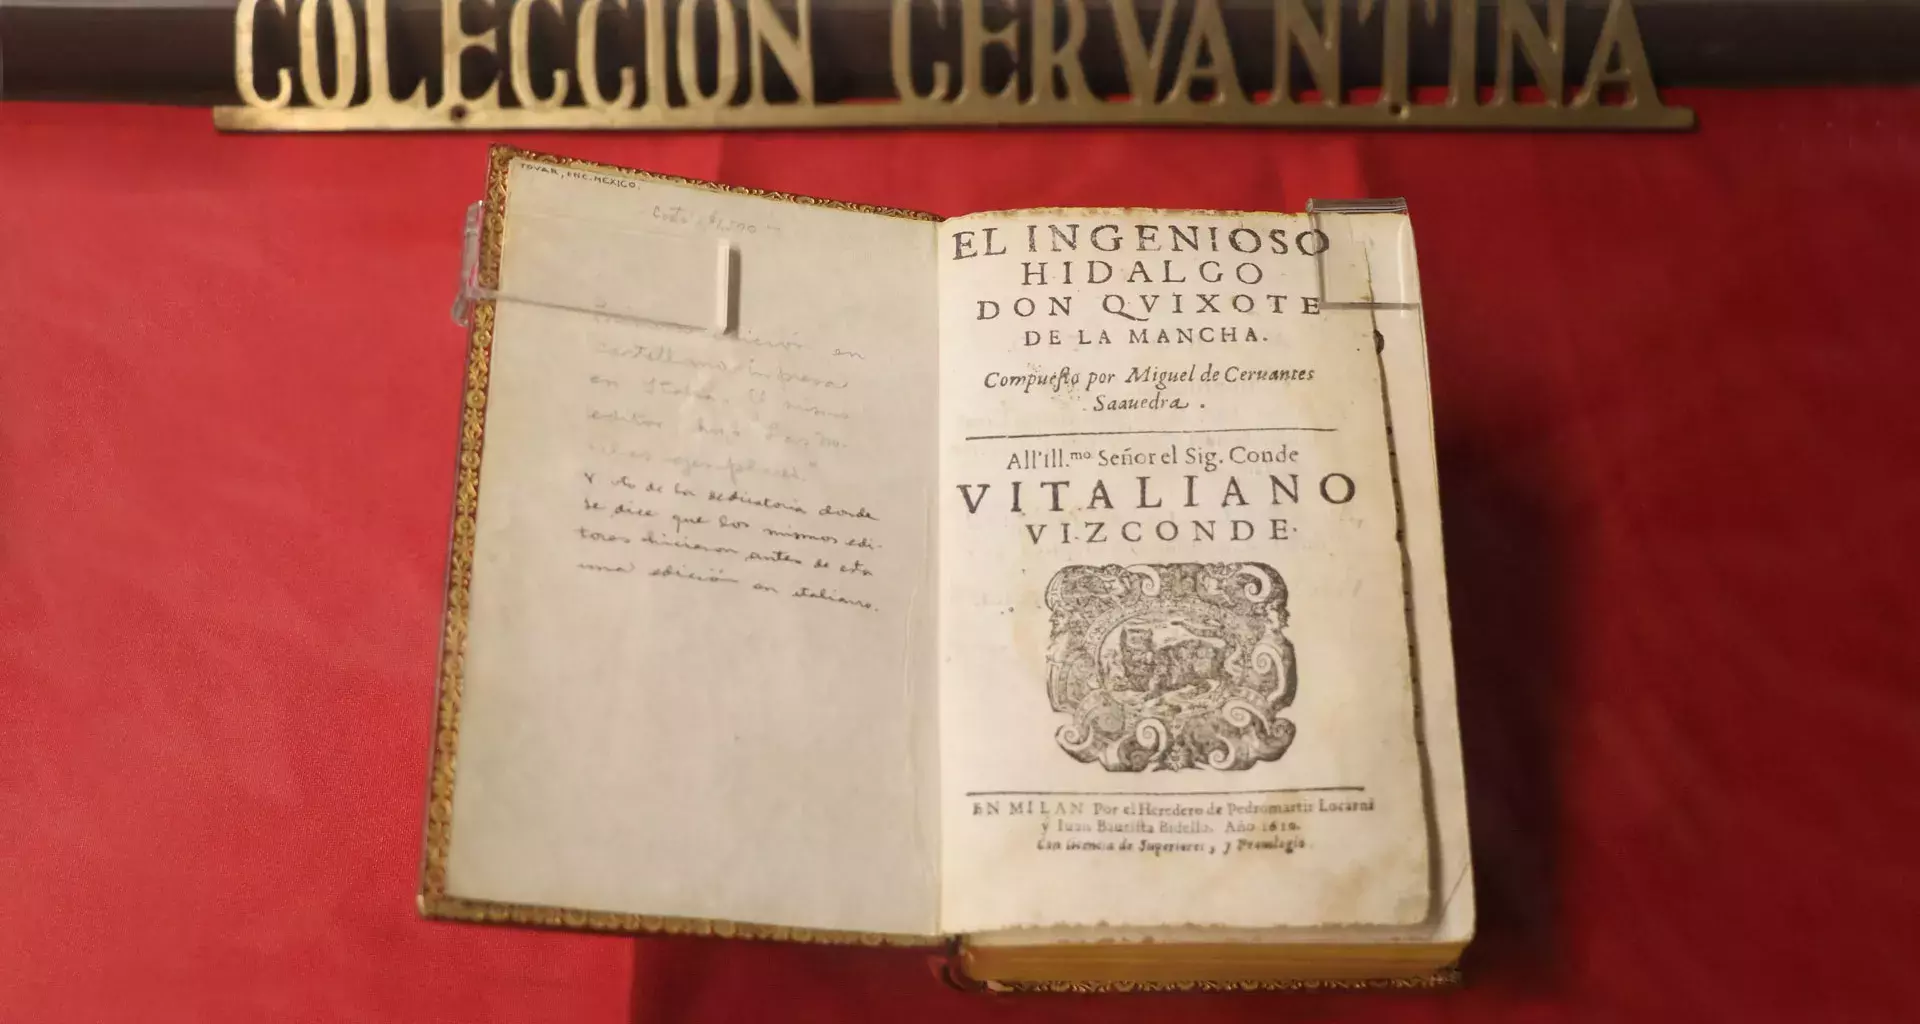 Cervantes Library, a cultural and historical heritage for all